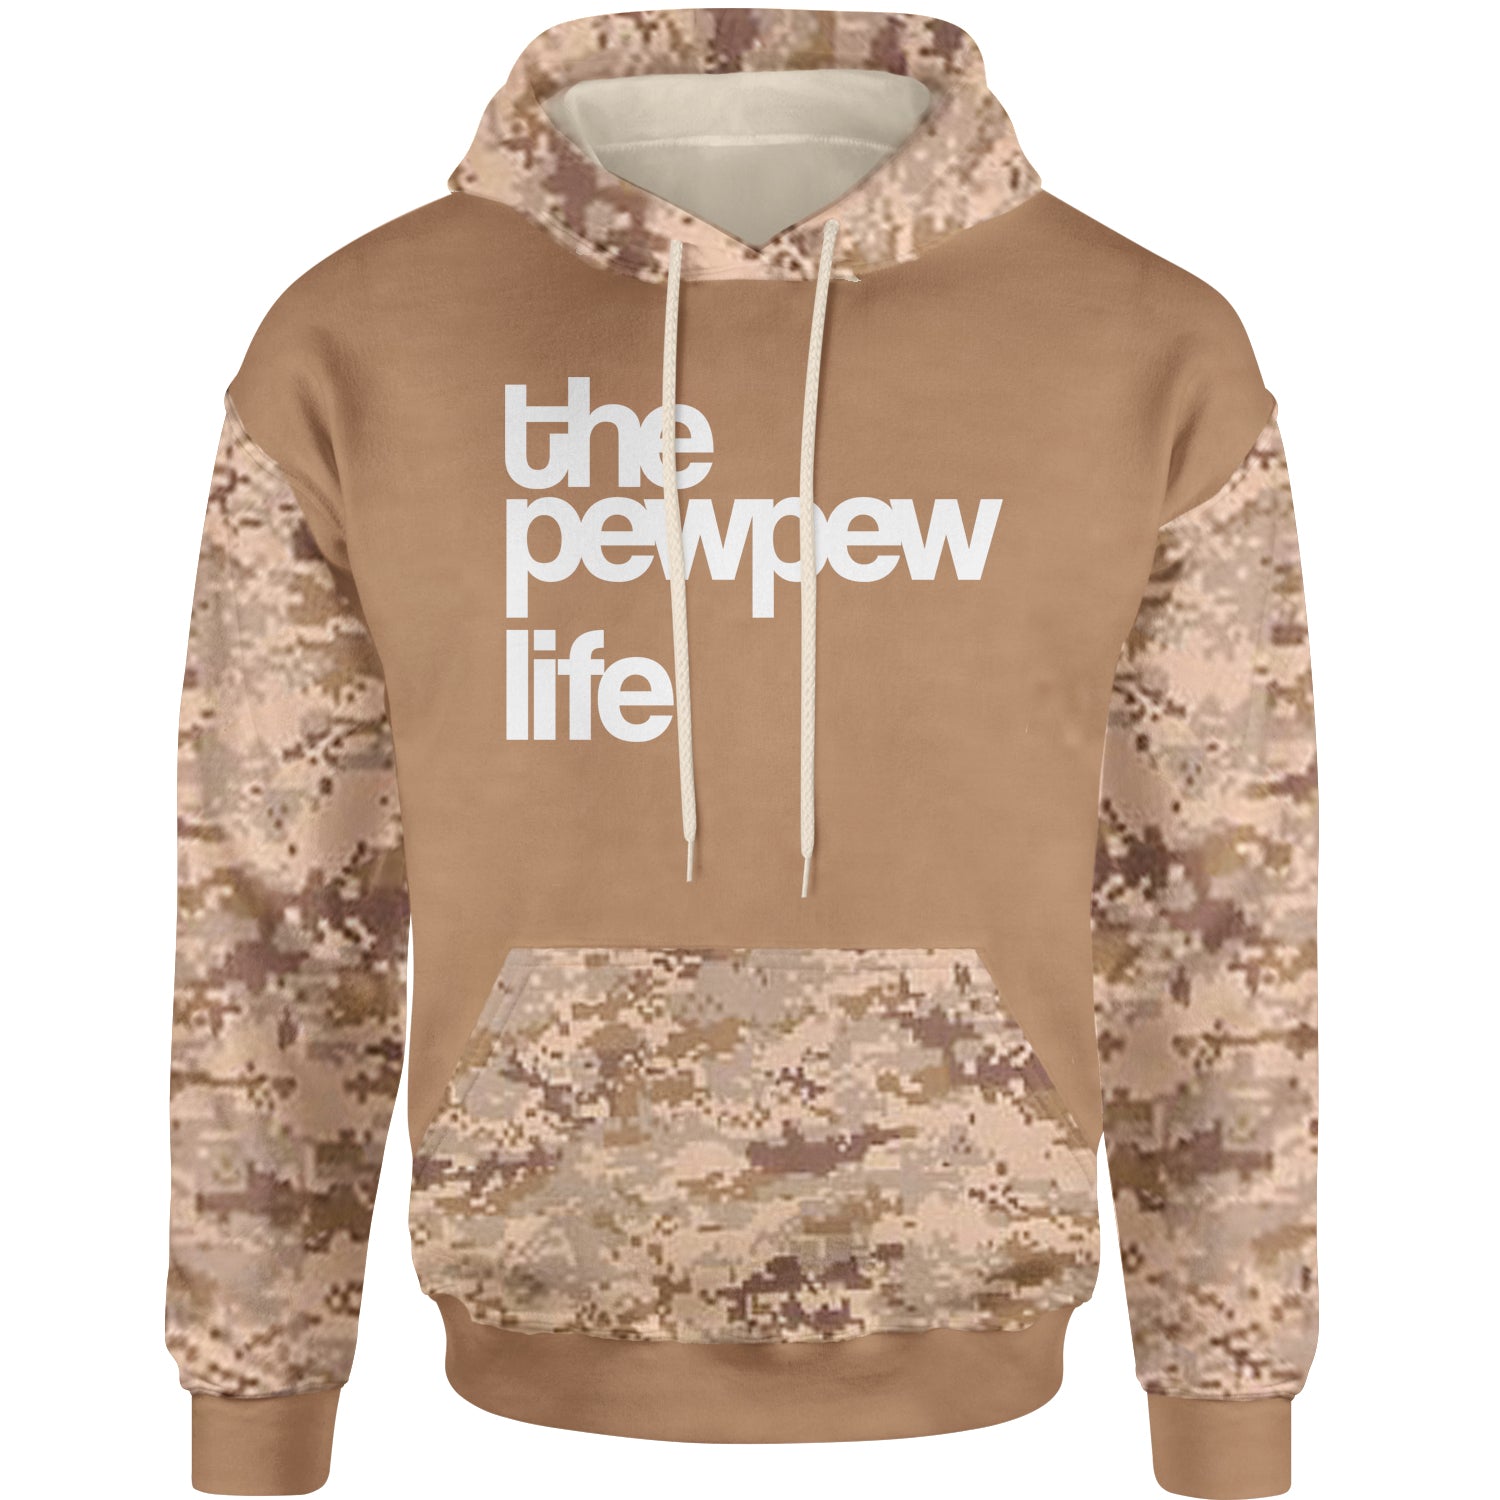 The PewPew Pew Pew Life Gun Rights Adult Hoodie Sweatshirt #expressiontees by Expression Tees